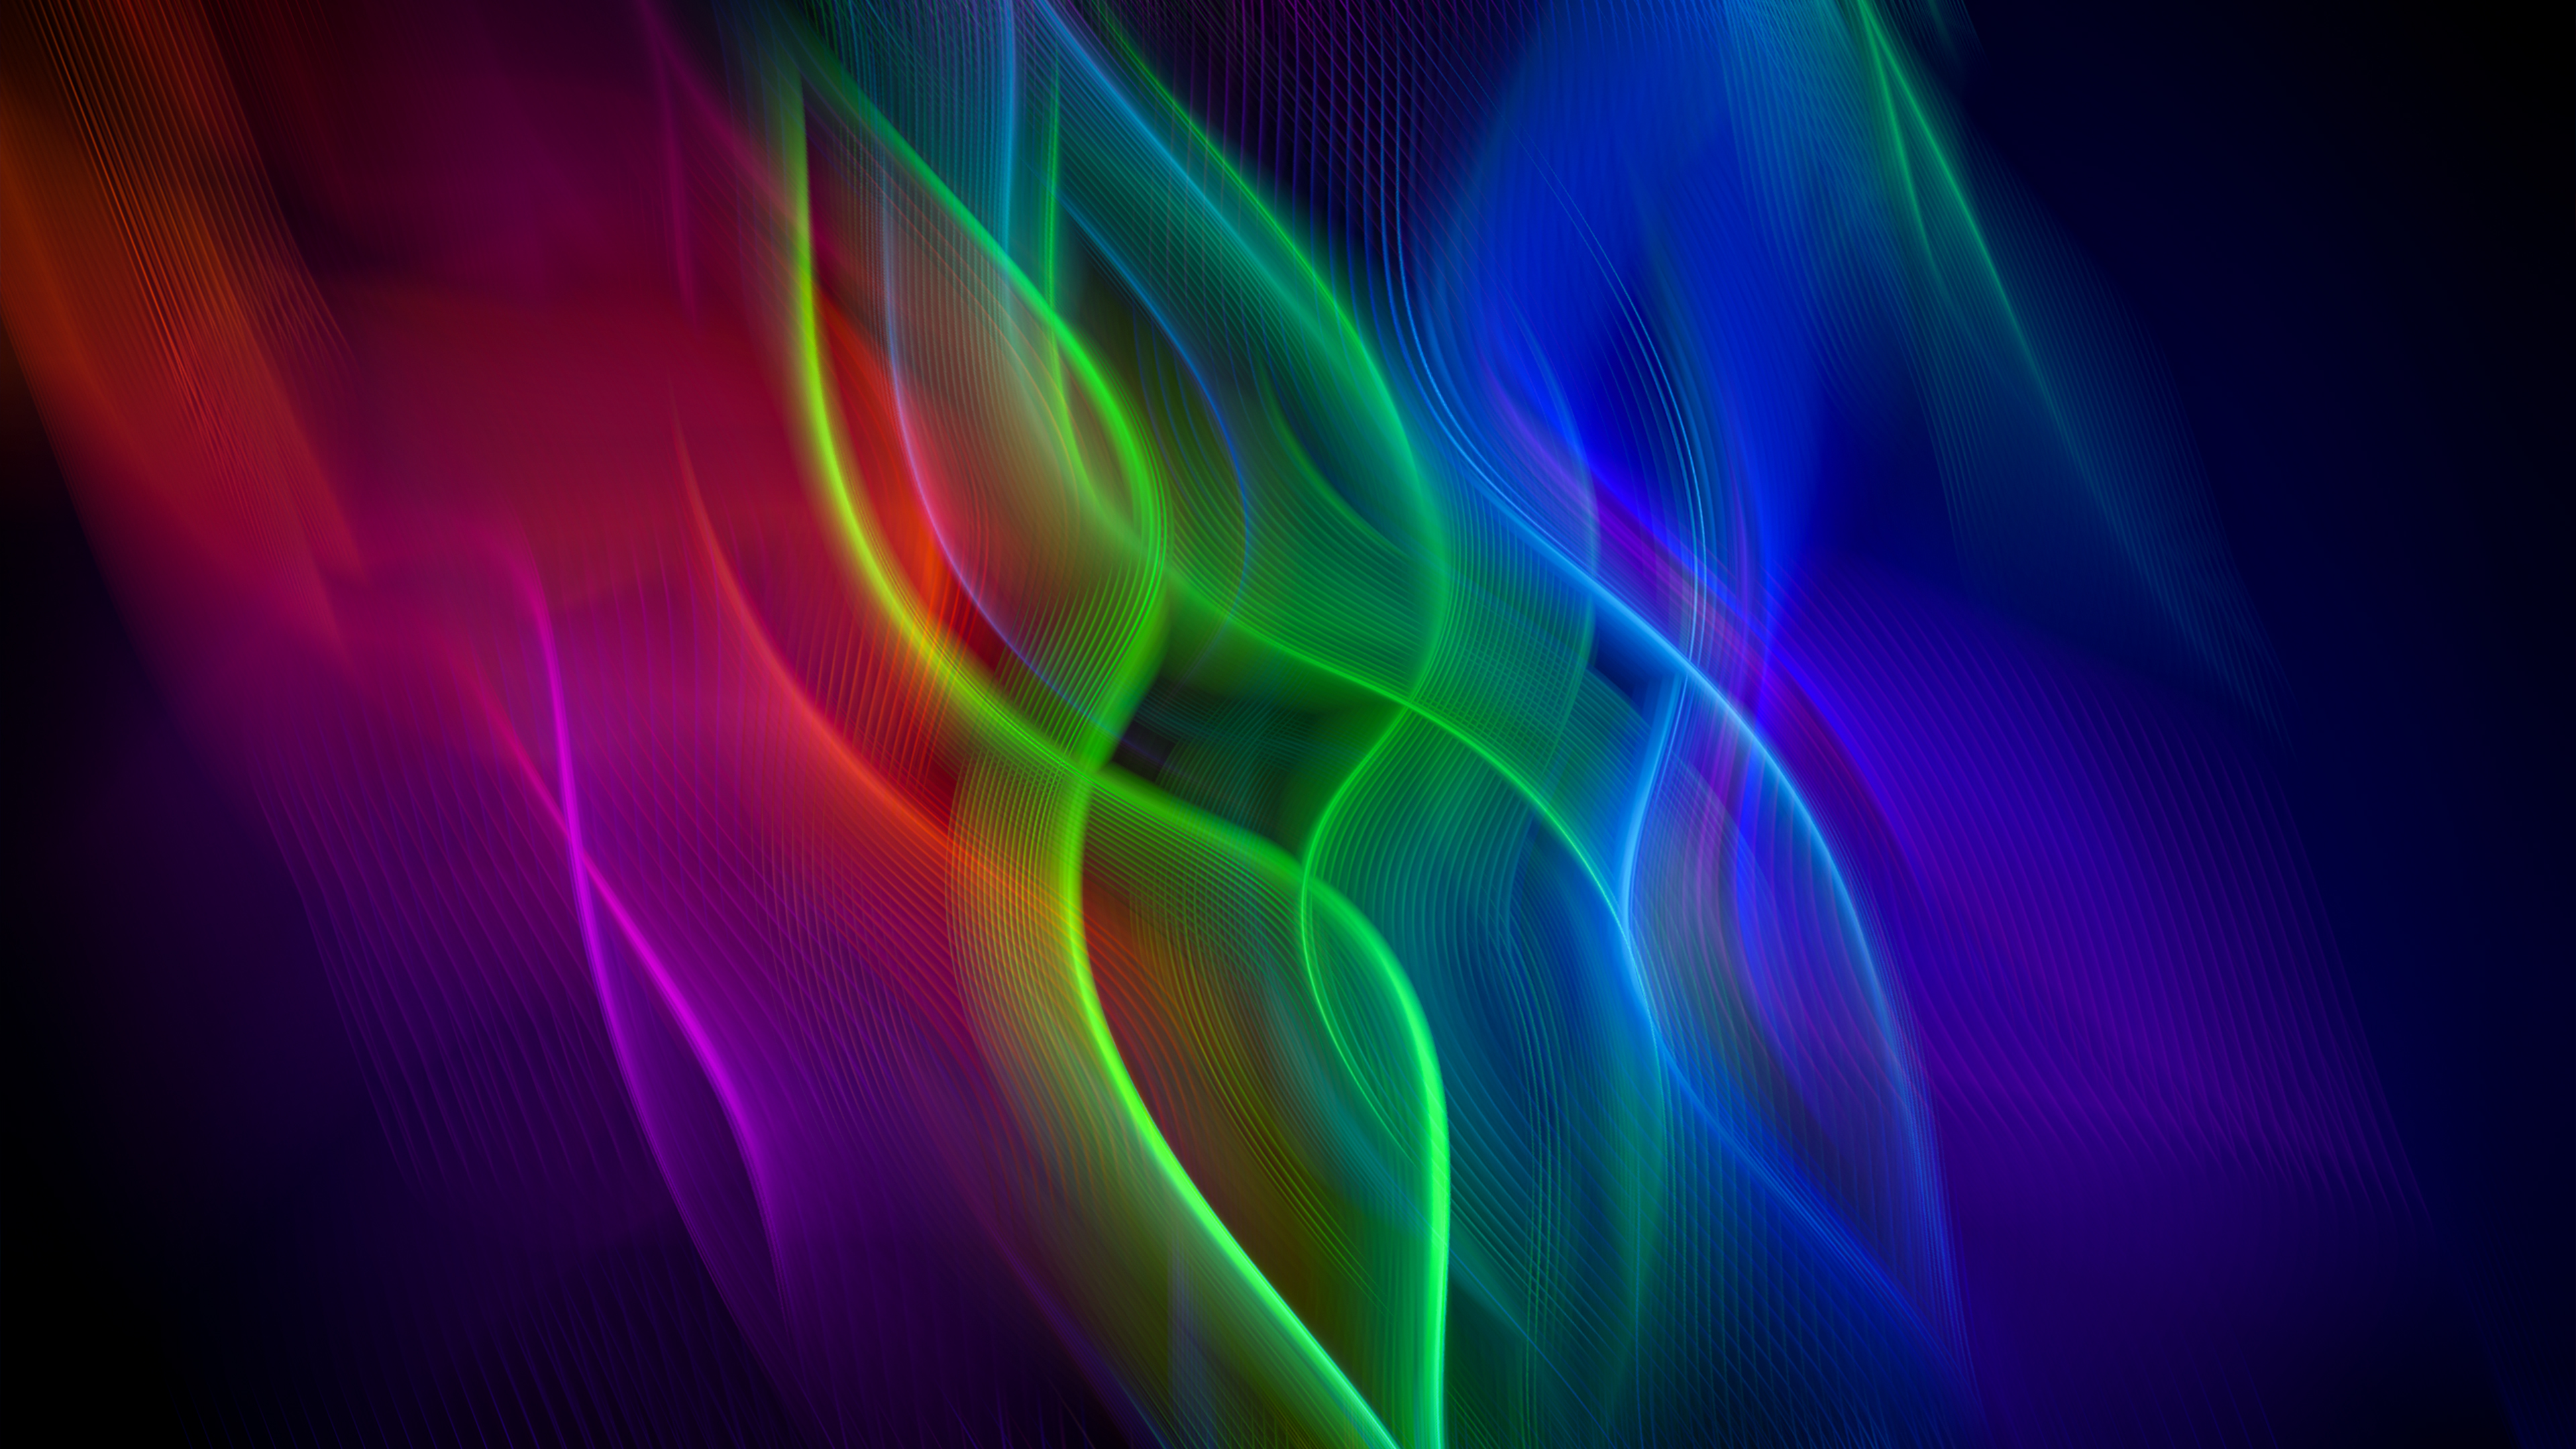 Abstract Swirly Wavy Lines Colorful 3840x2160